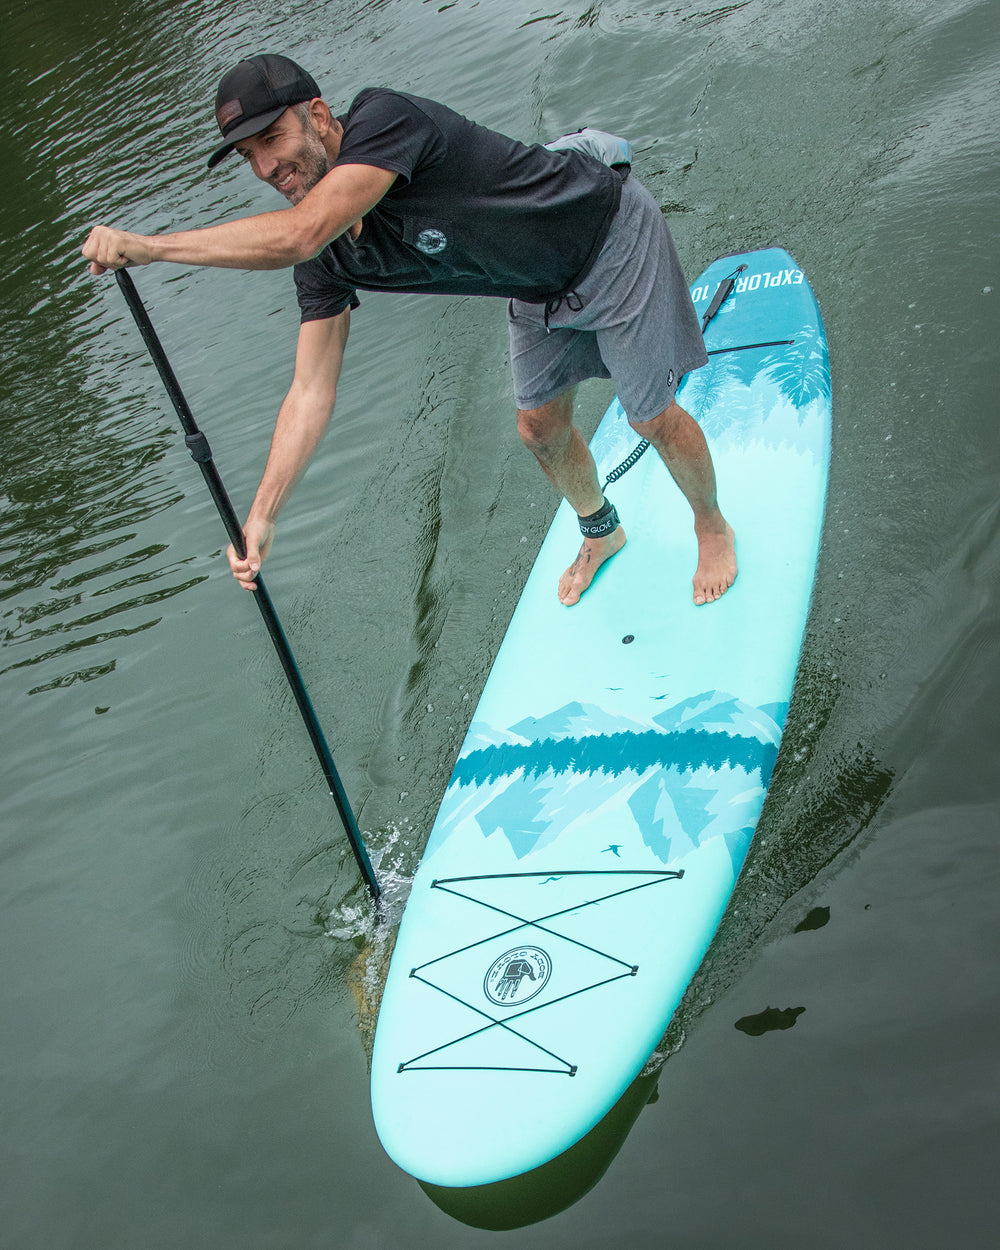 The Best Stand Up Paddle Boards for Surfing